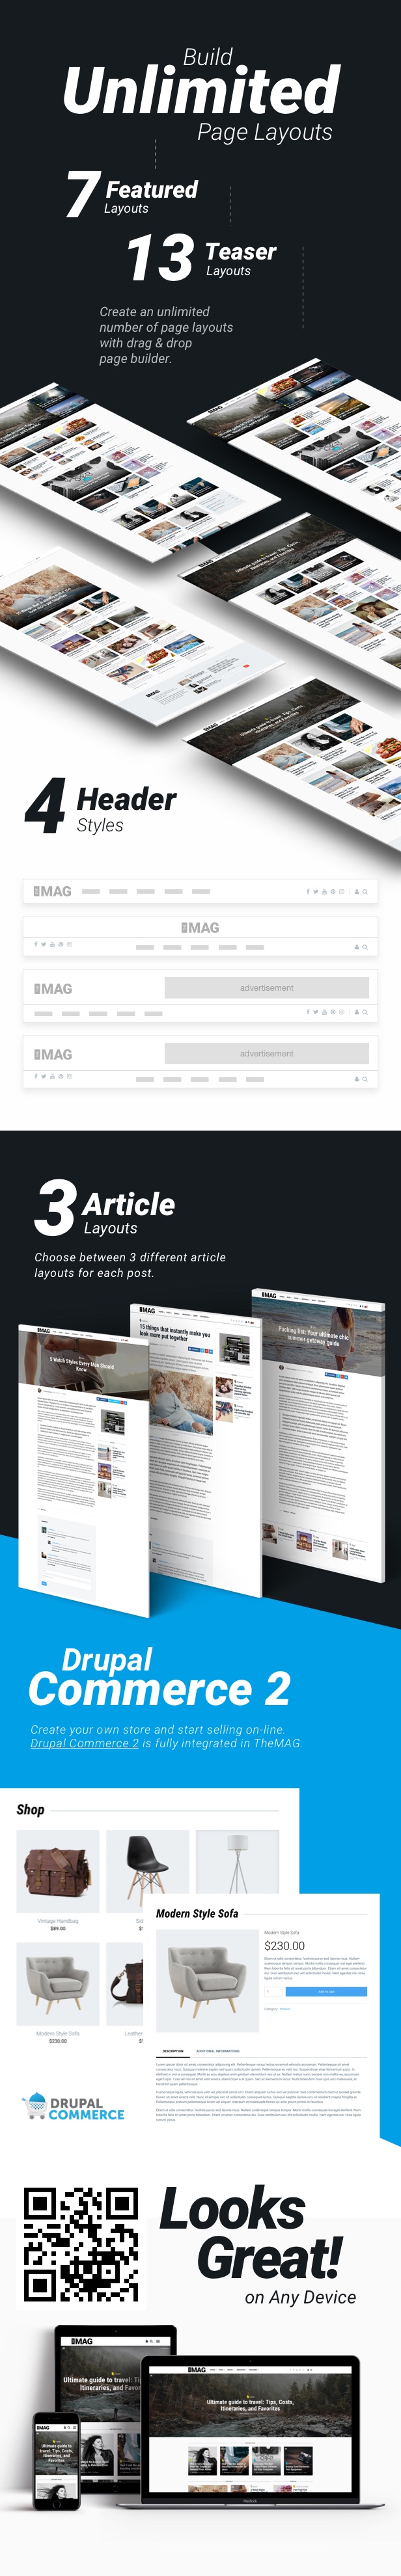 TheMAG - Highly Customizable Blog and Magazine Theme for Drupal - 4